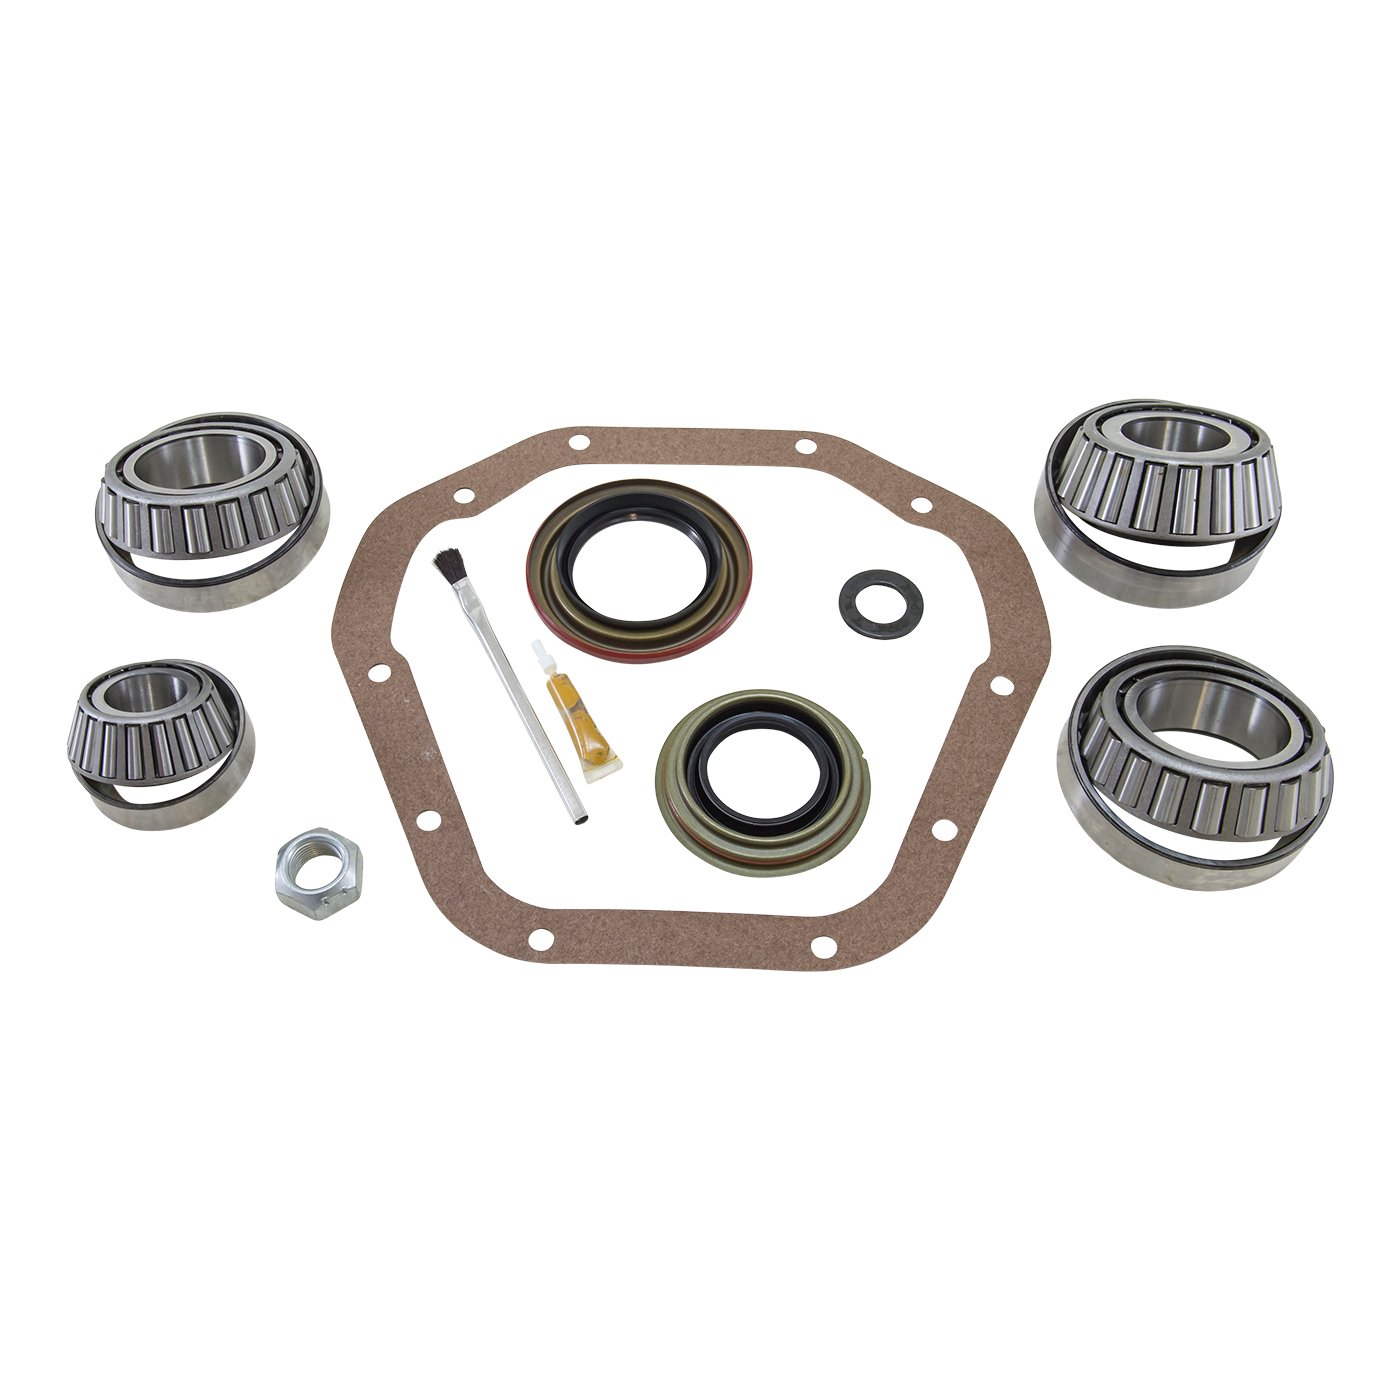 Bearing Installation Kit For Dana 70-HD & Super-70 Differential Includes: